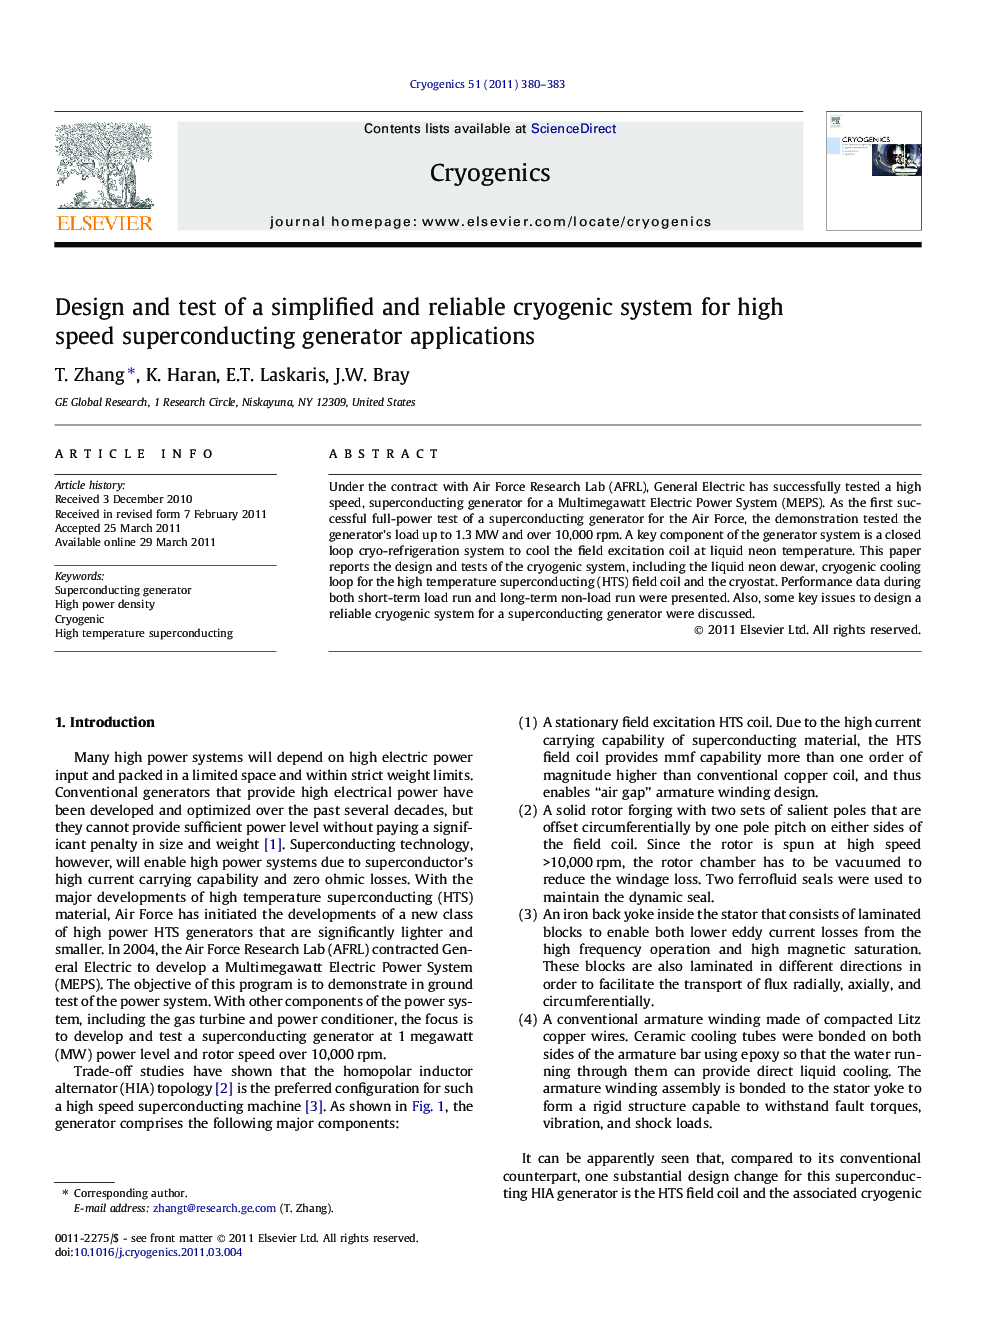 Design and test of a simplified and reliable cryogenic system for high speed superconducting generator applications